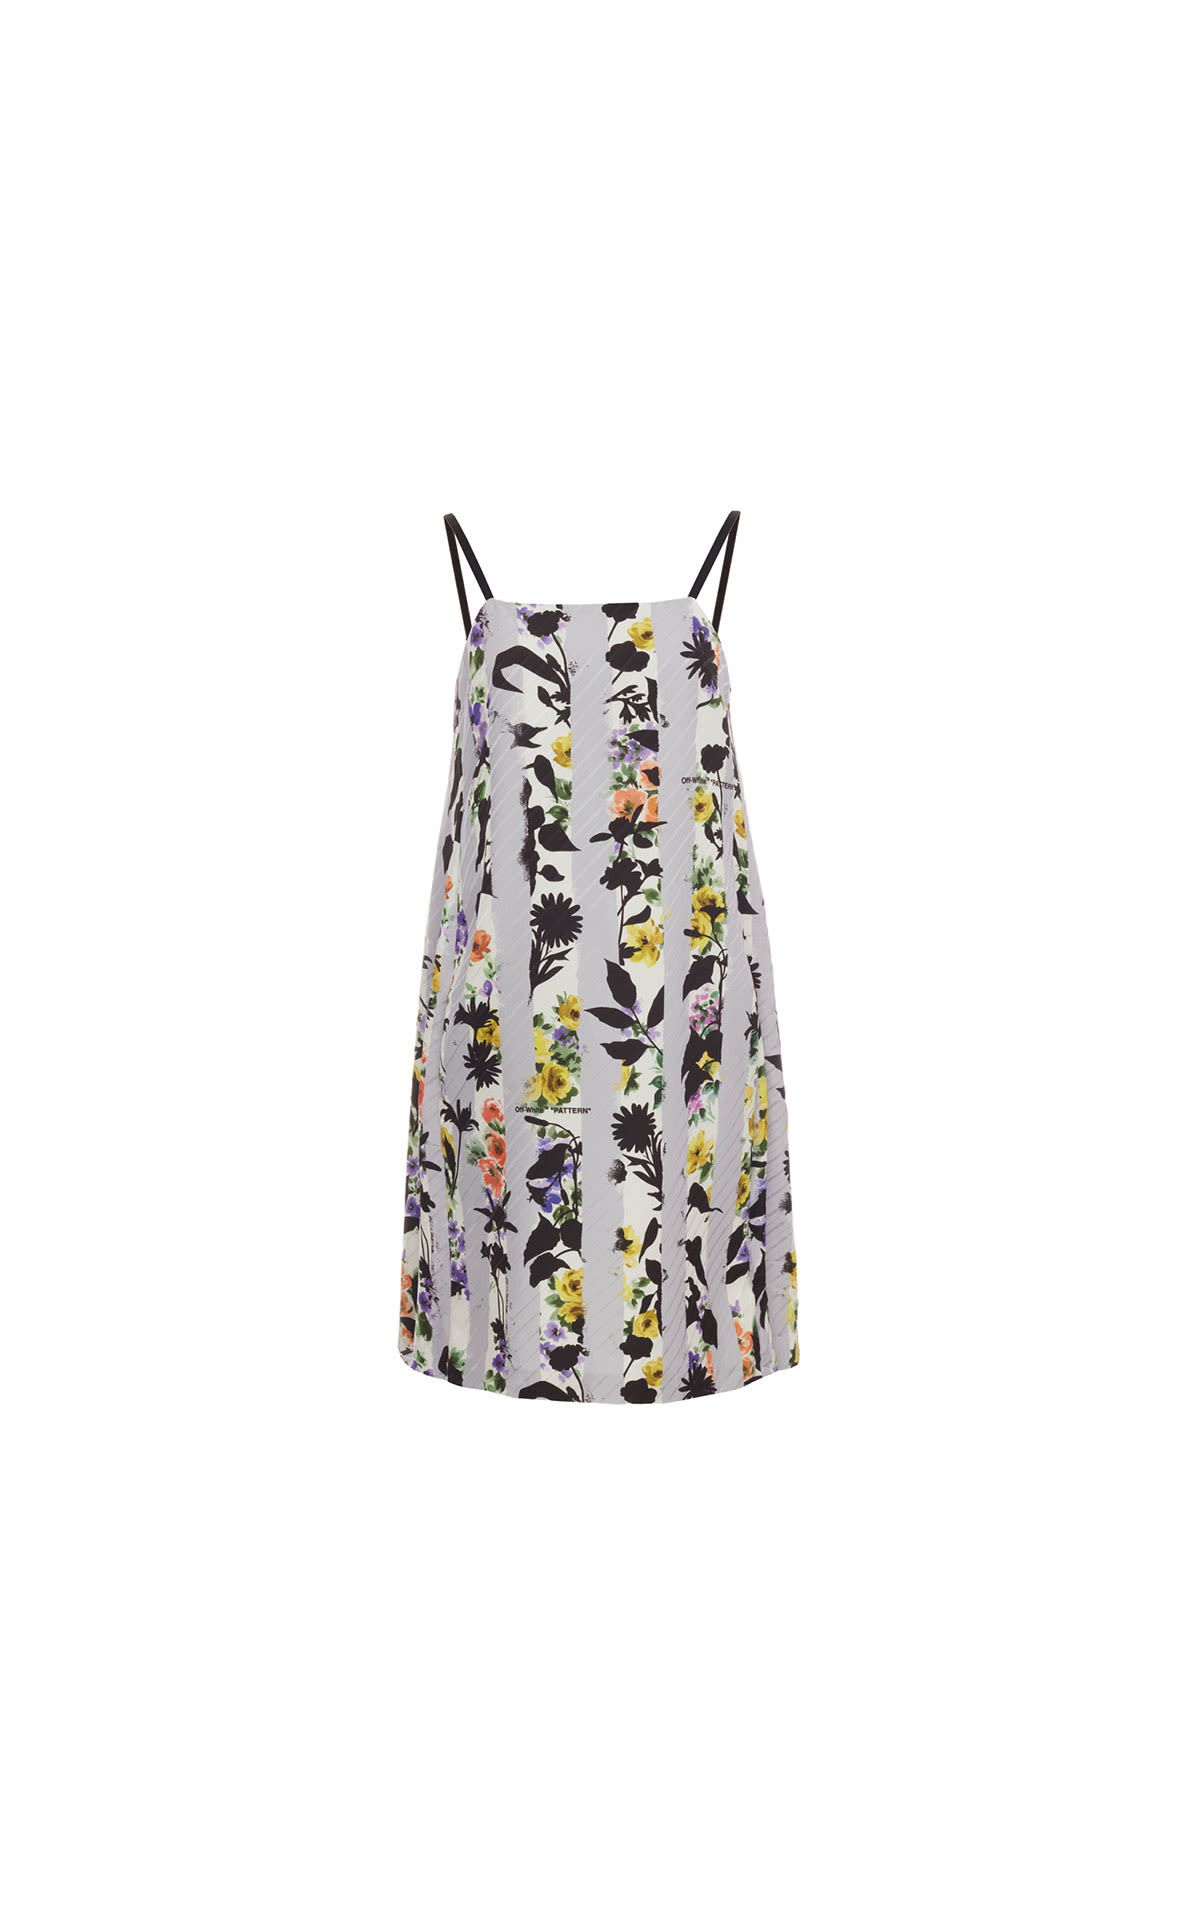 Off-White Stripes string floral print dress from Bicester Village